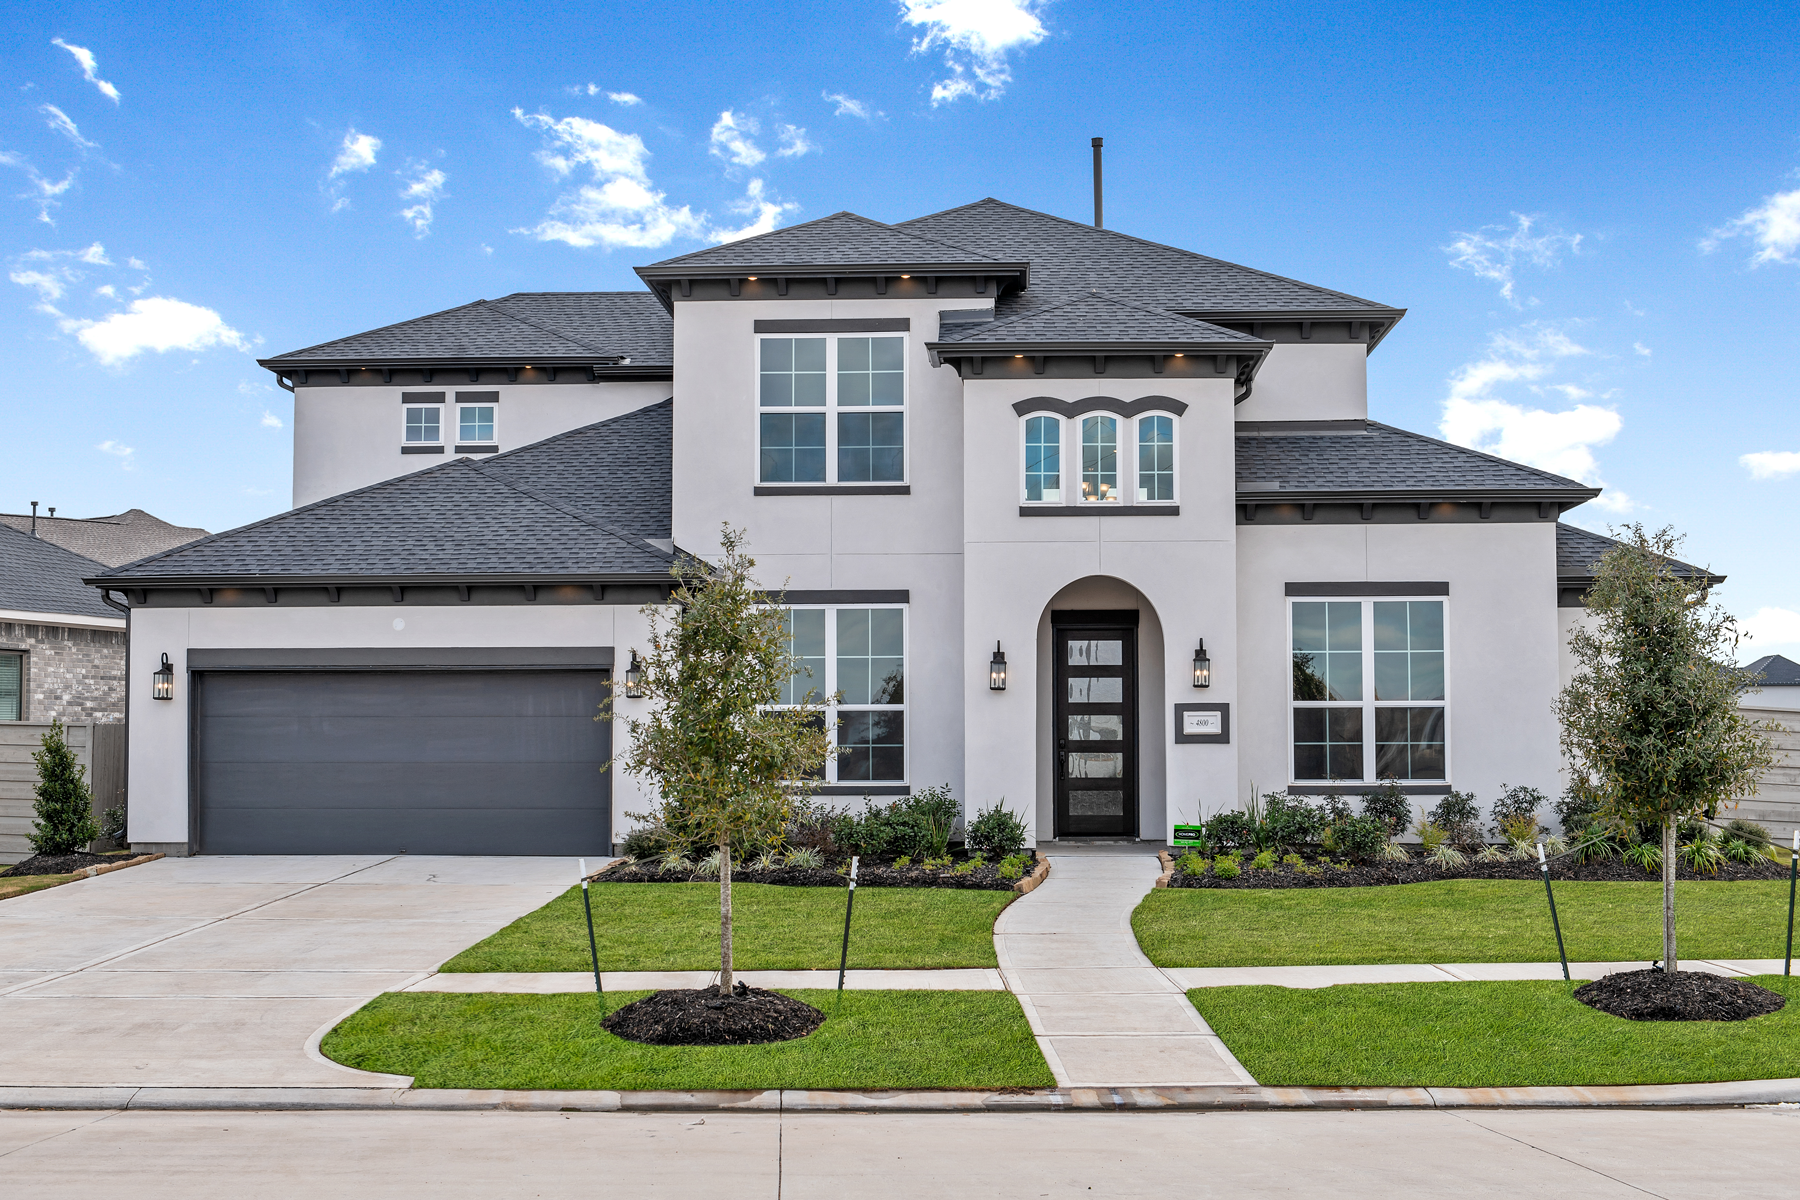 Toll Brother Exterior - move in ready homes for sale